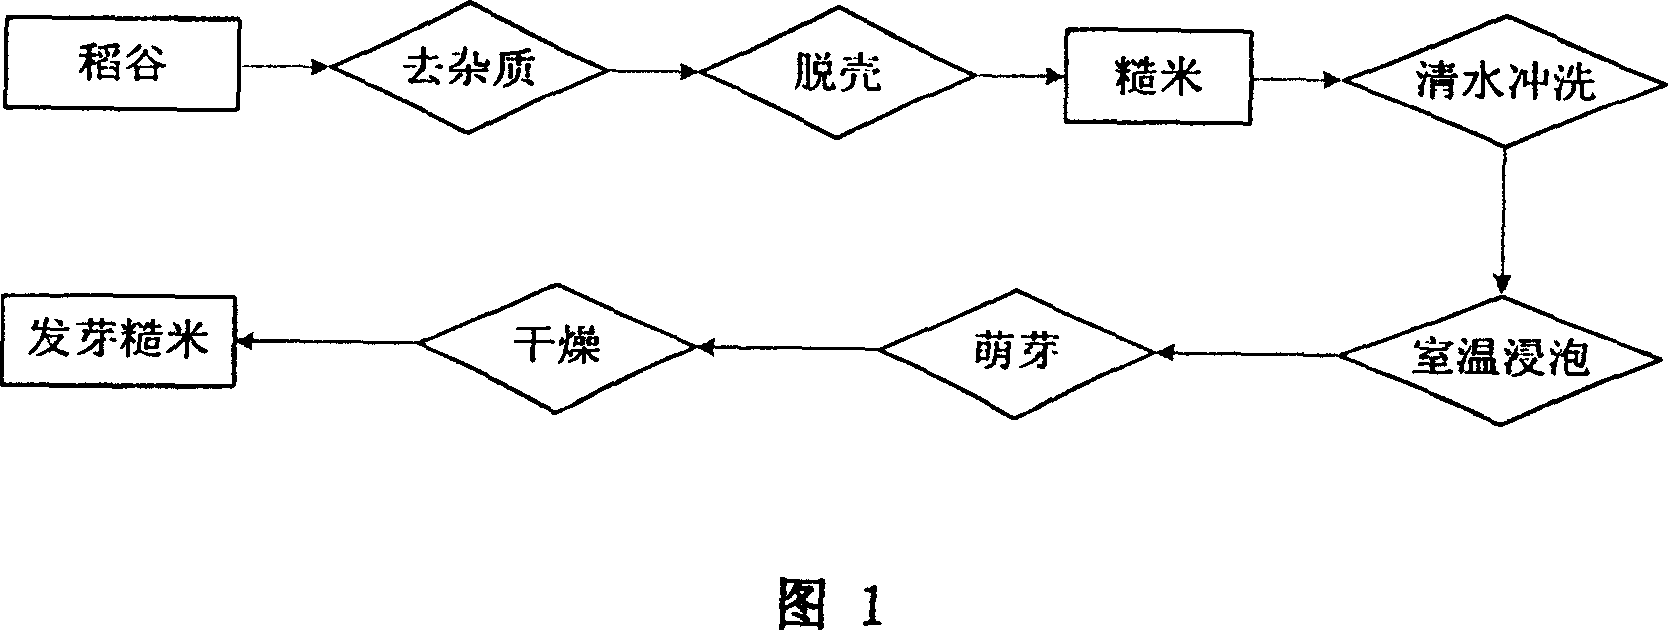 Processing method of sprouted half-polished and obtained sprouted half-polished rice